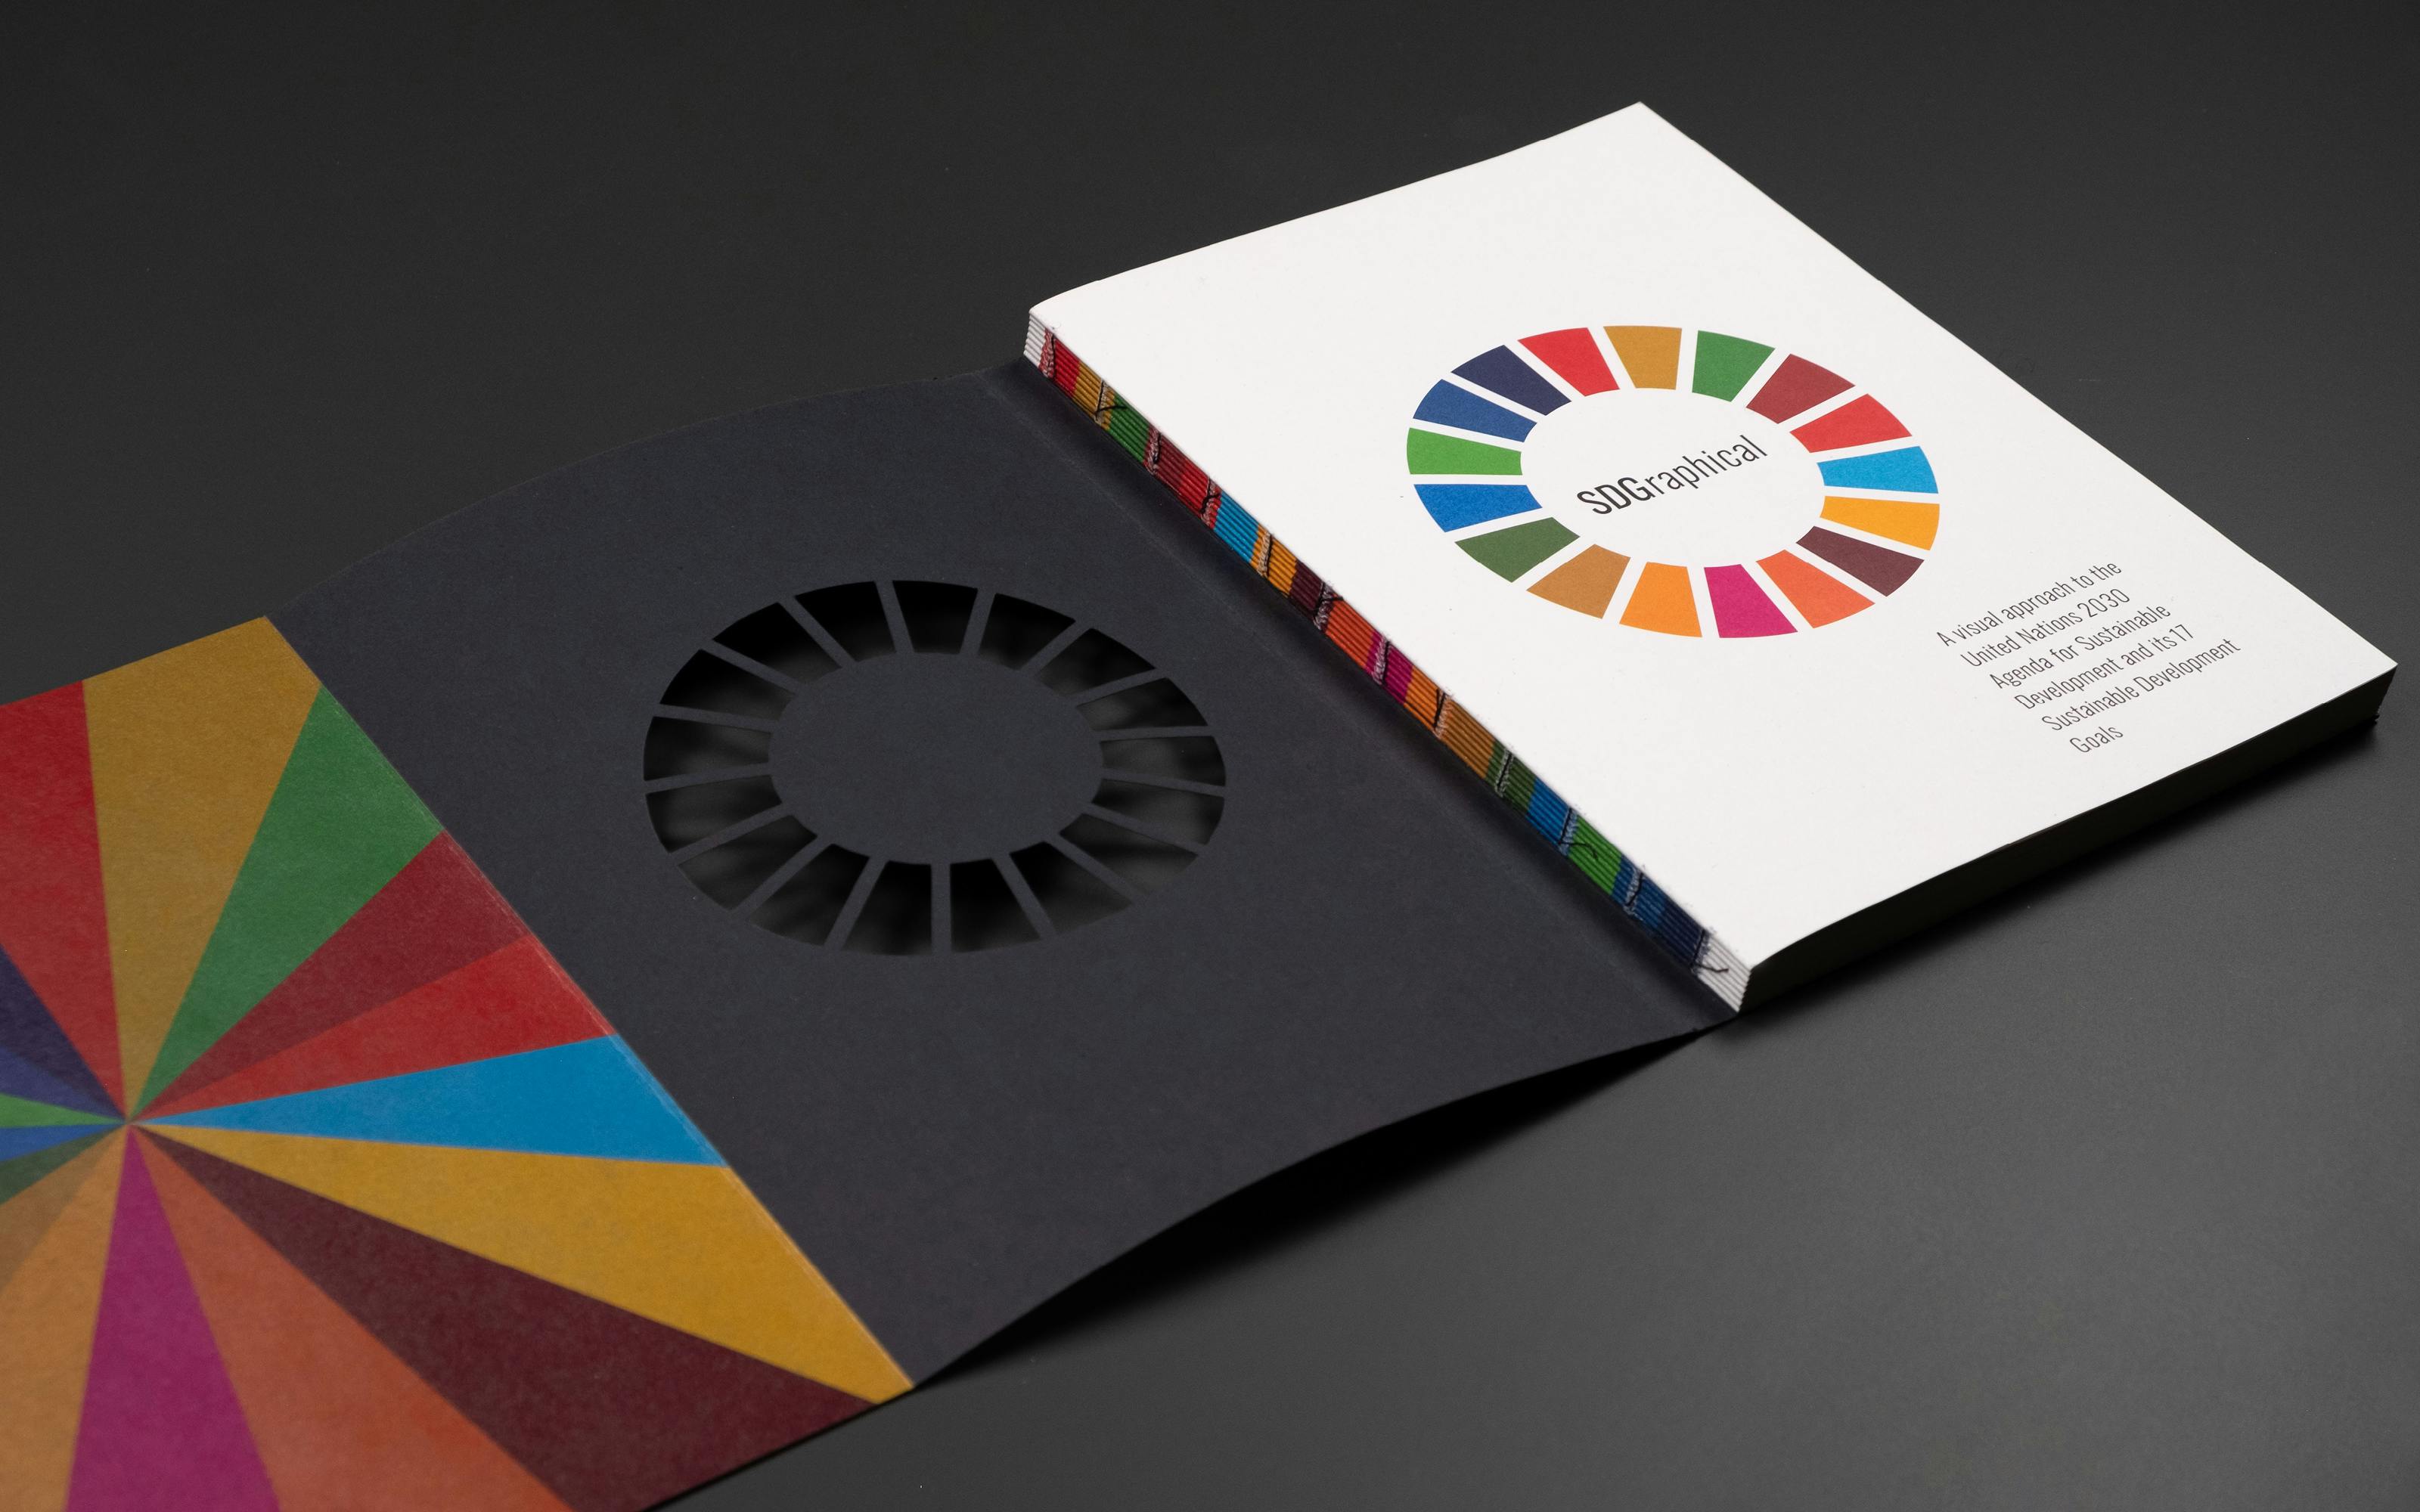 In collaboration with the Swiss Federal Statistical Office, this project breaks new ground in the field of statistical books by focusing on innovative data design. The publication was developed for the UN World Data Forum 2021 organized by Road to Bern. The concept is on the one hand to present all countries in an overview for each of the 17 Goals and on the other hand to compare the values of the world average with Switzerland. Based on the official 17 SDG colors and icons, we developed a visua